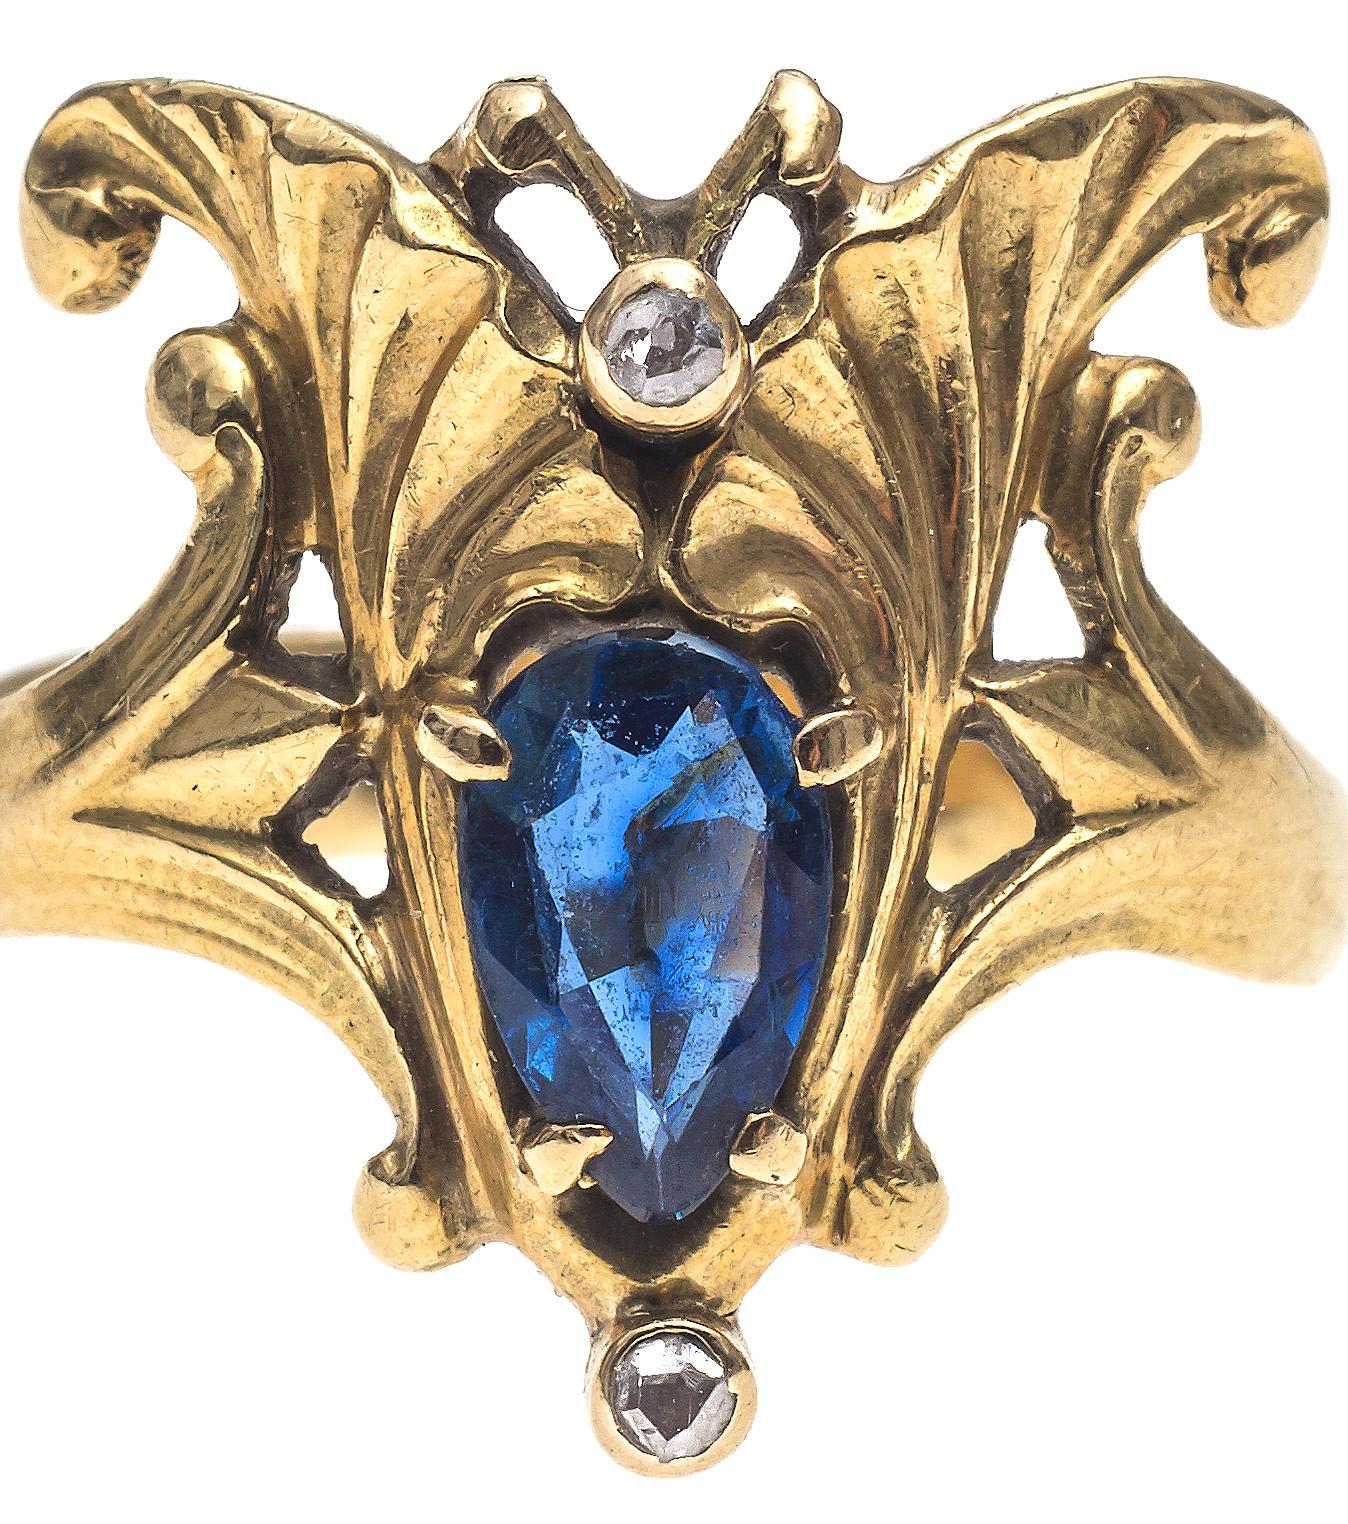 Finely chiselled Art Nouveau ring in 18K gold. The shank terminates in two lotus flowers. The two lotus flowers hold two ginkgo leaves which in turn are holding a drop shaped sapphire. Two small gold mounted rose diamonds decorate the front of the